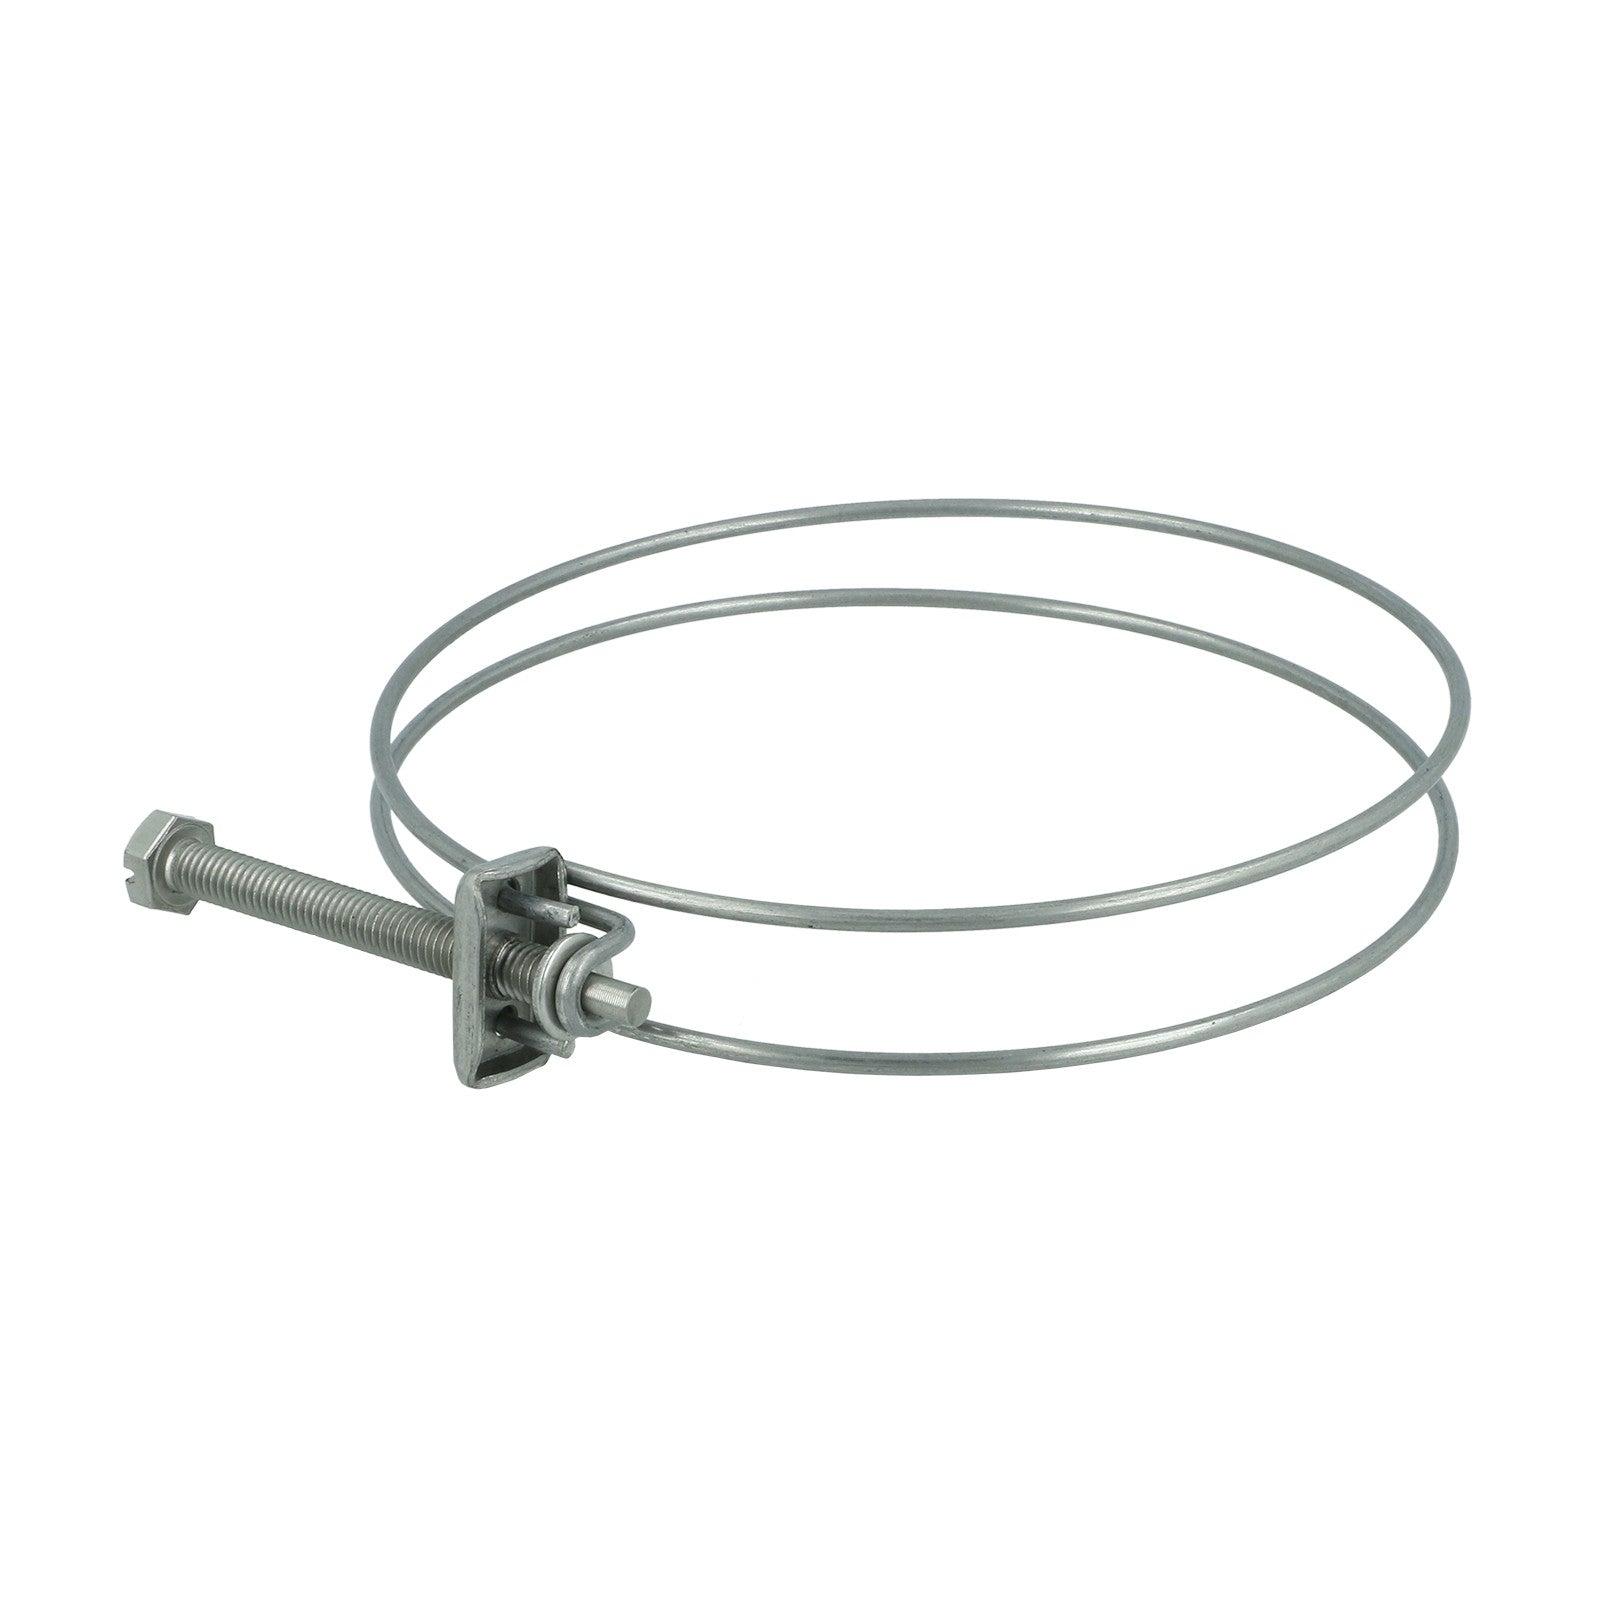 BOOST Products 4" Double Wire Hose Clamp - Stainless Steel Range